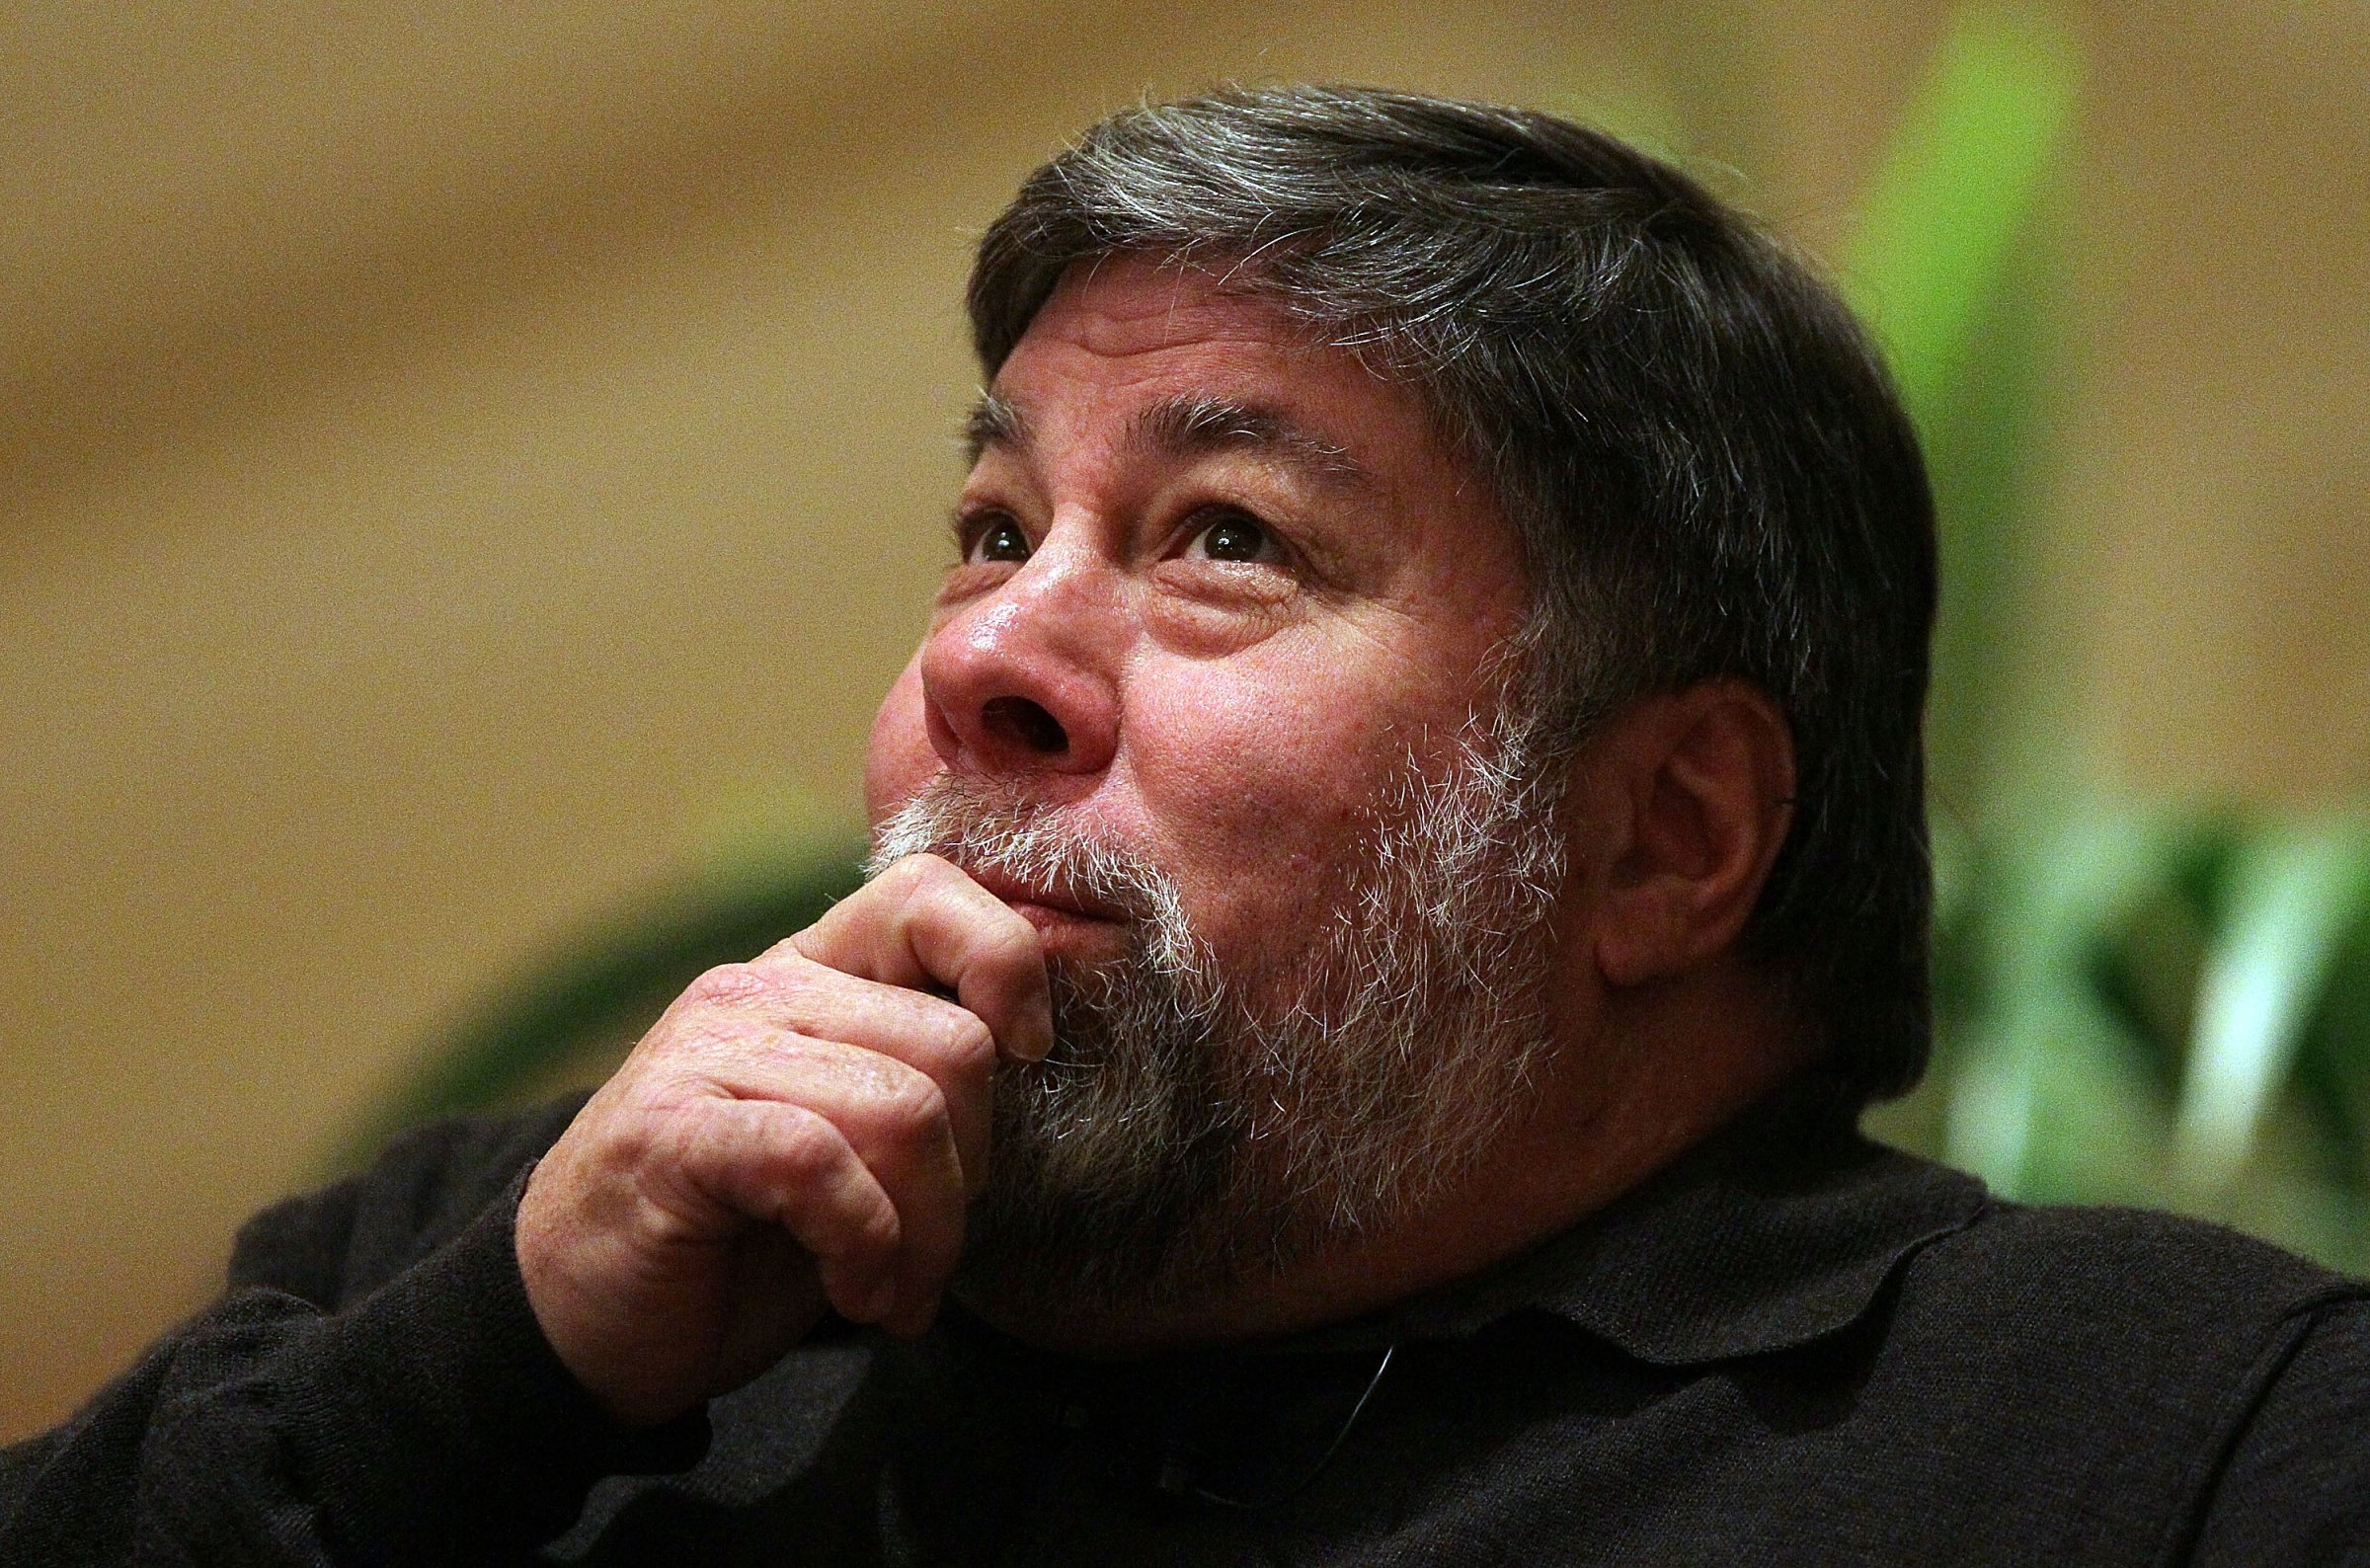 Apple Computer co-founder and philanthropist Steve Wozniak pauses while speaking at the Bay Area Discovery Museum's Discovery Forum on Feb. 1, 2010 in San Francisco.